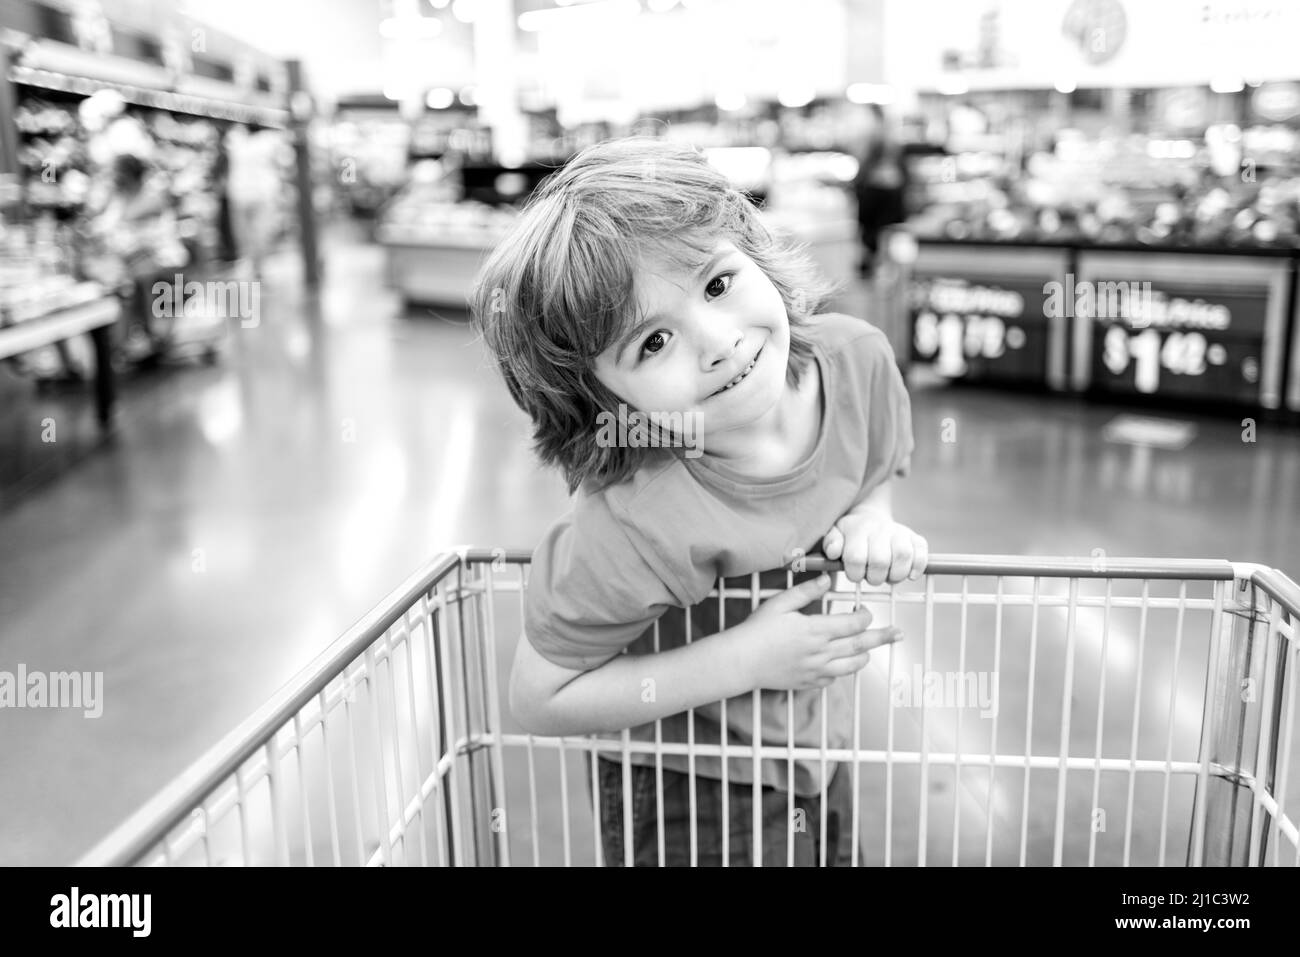 Funny customer boy child holdind trolley, shopping at supermarket, grocery store. Stock Photo